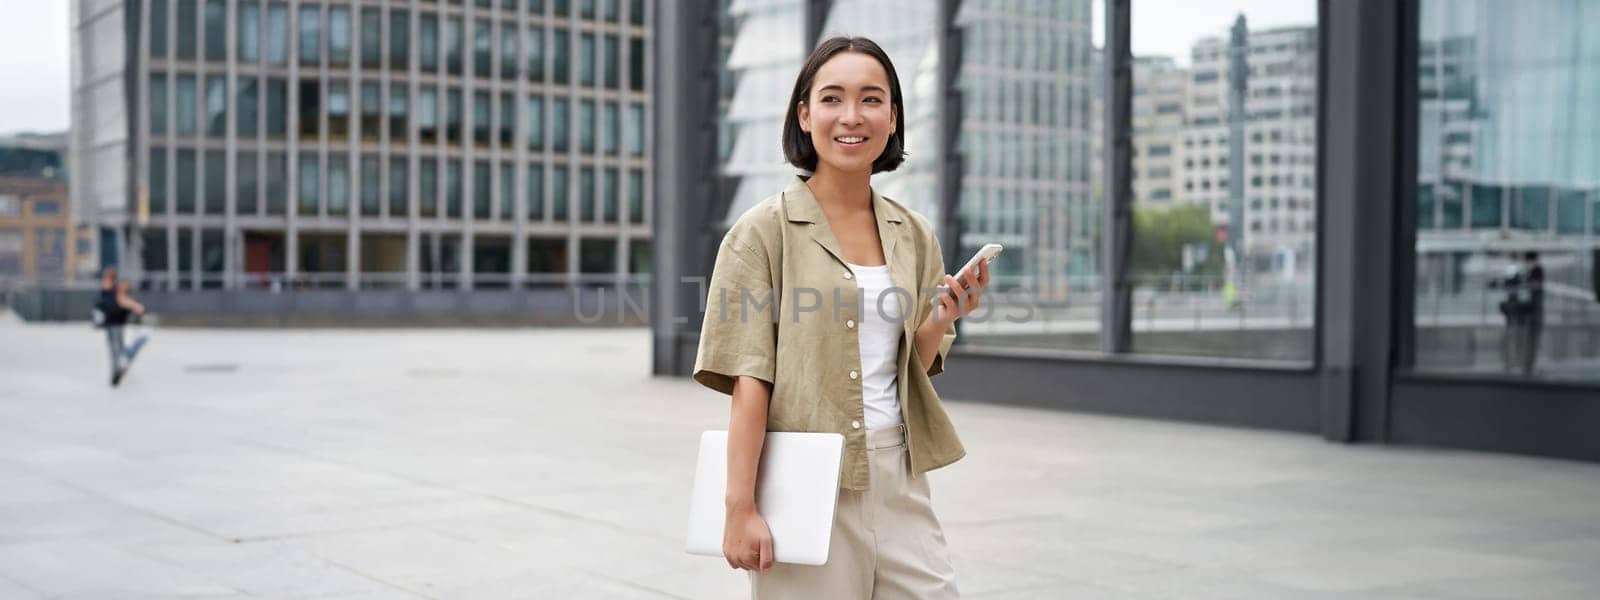 Asian girl with laptop and smartphone, standing on street of city centre, smiling at camera.